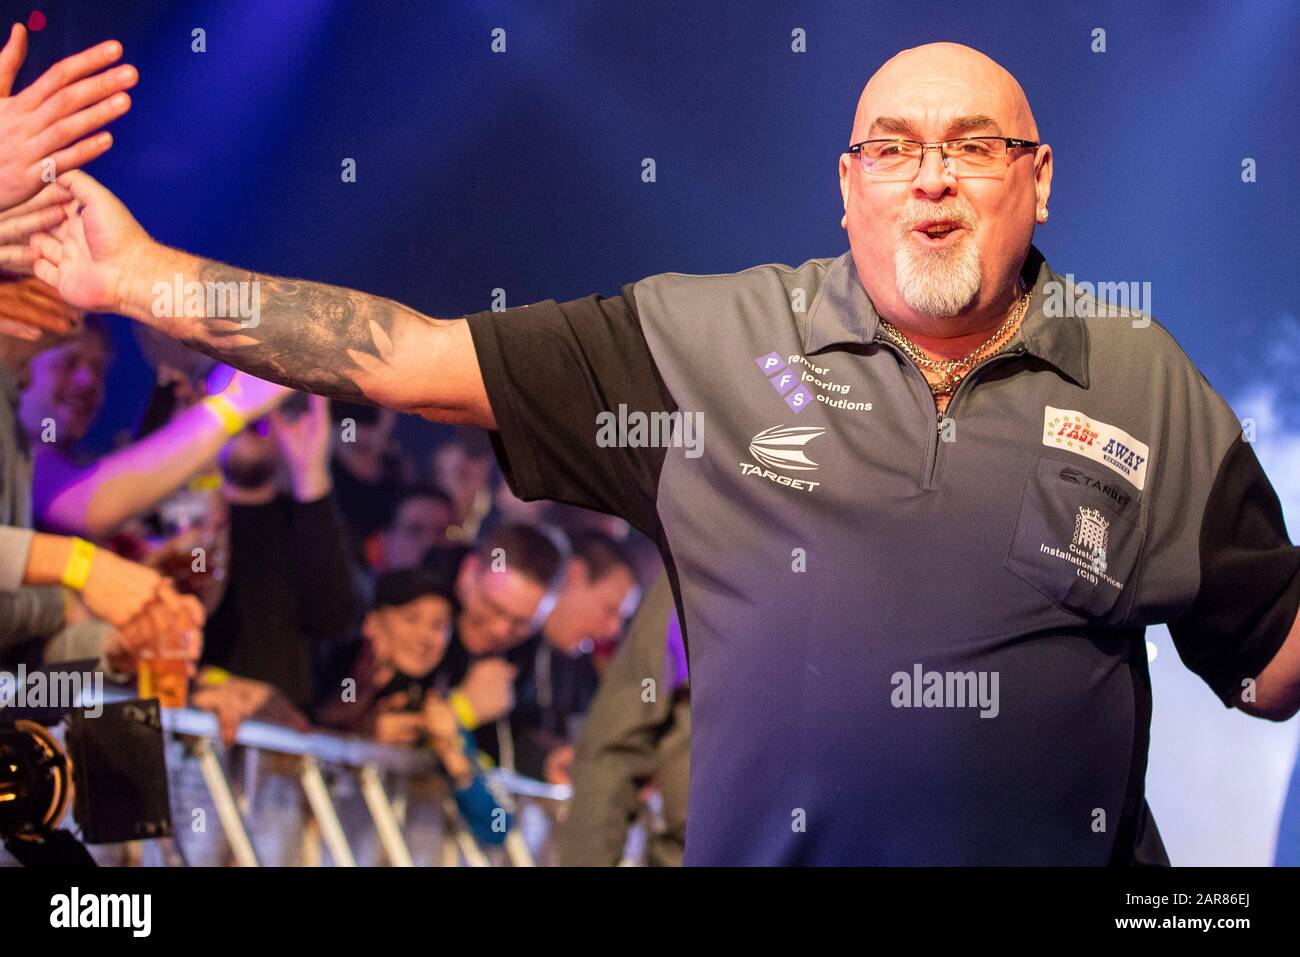 Enschede, Nederland. 26th 2020. ENSCHEDE, Kings of Darts Enschede, Expo Twente, 26-01-2020. Darts player Tony o Shea During the Kings of Darts tournament. Credit: Pro Shots/Alamy Live News Stock Photo - Alamy